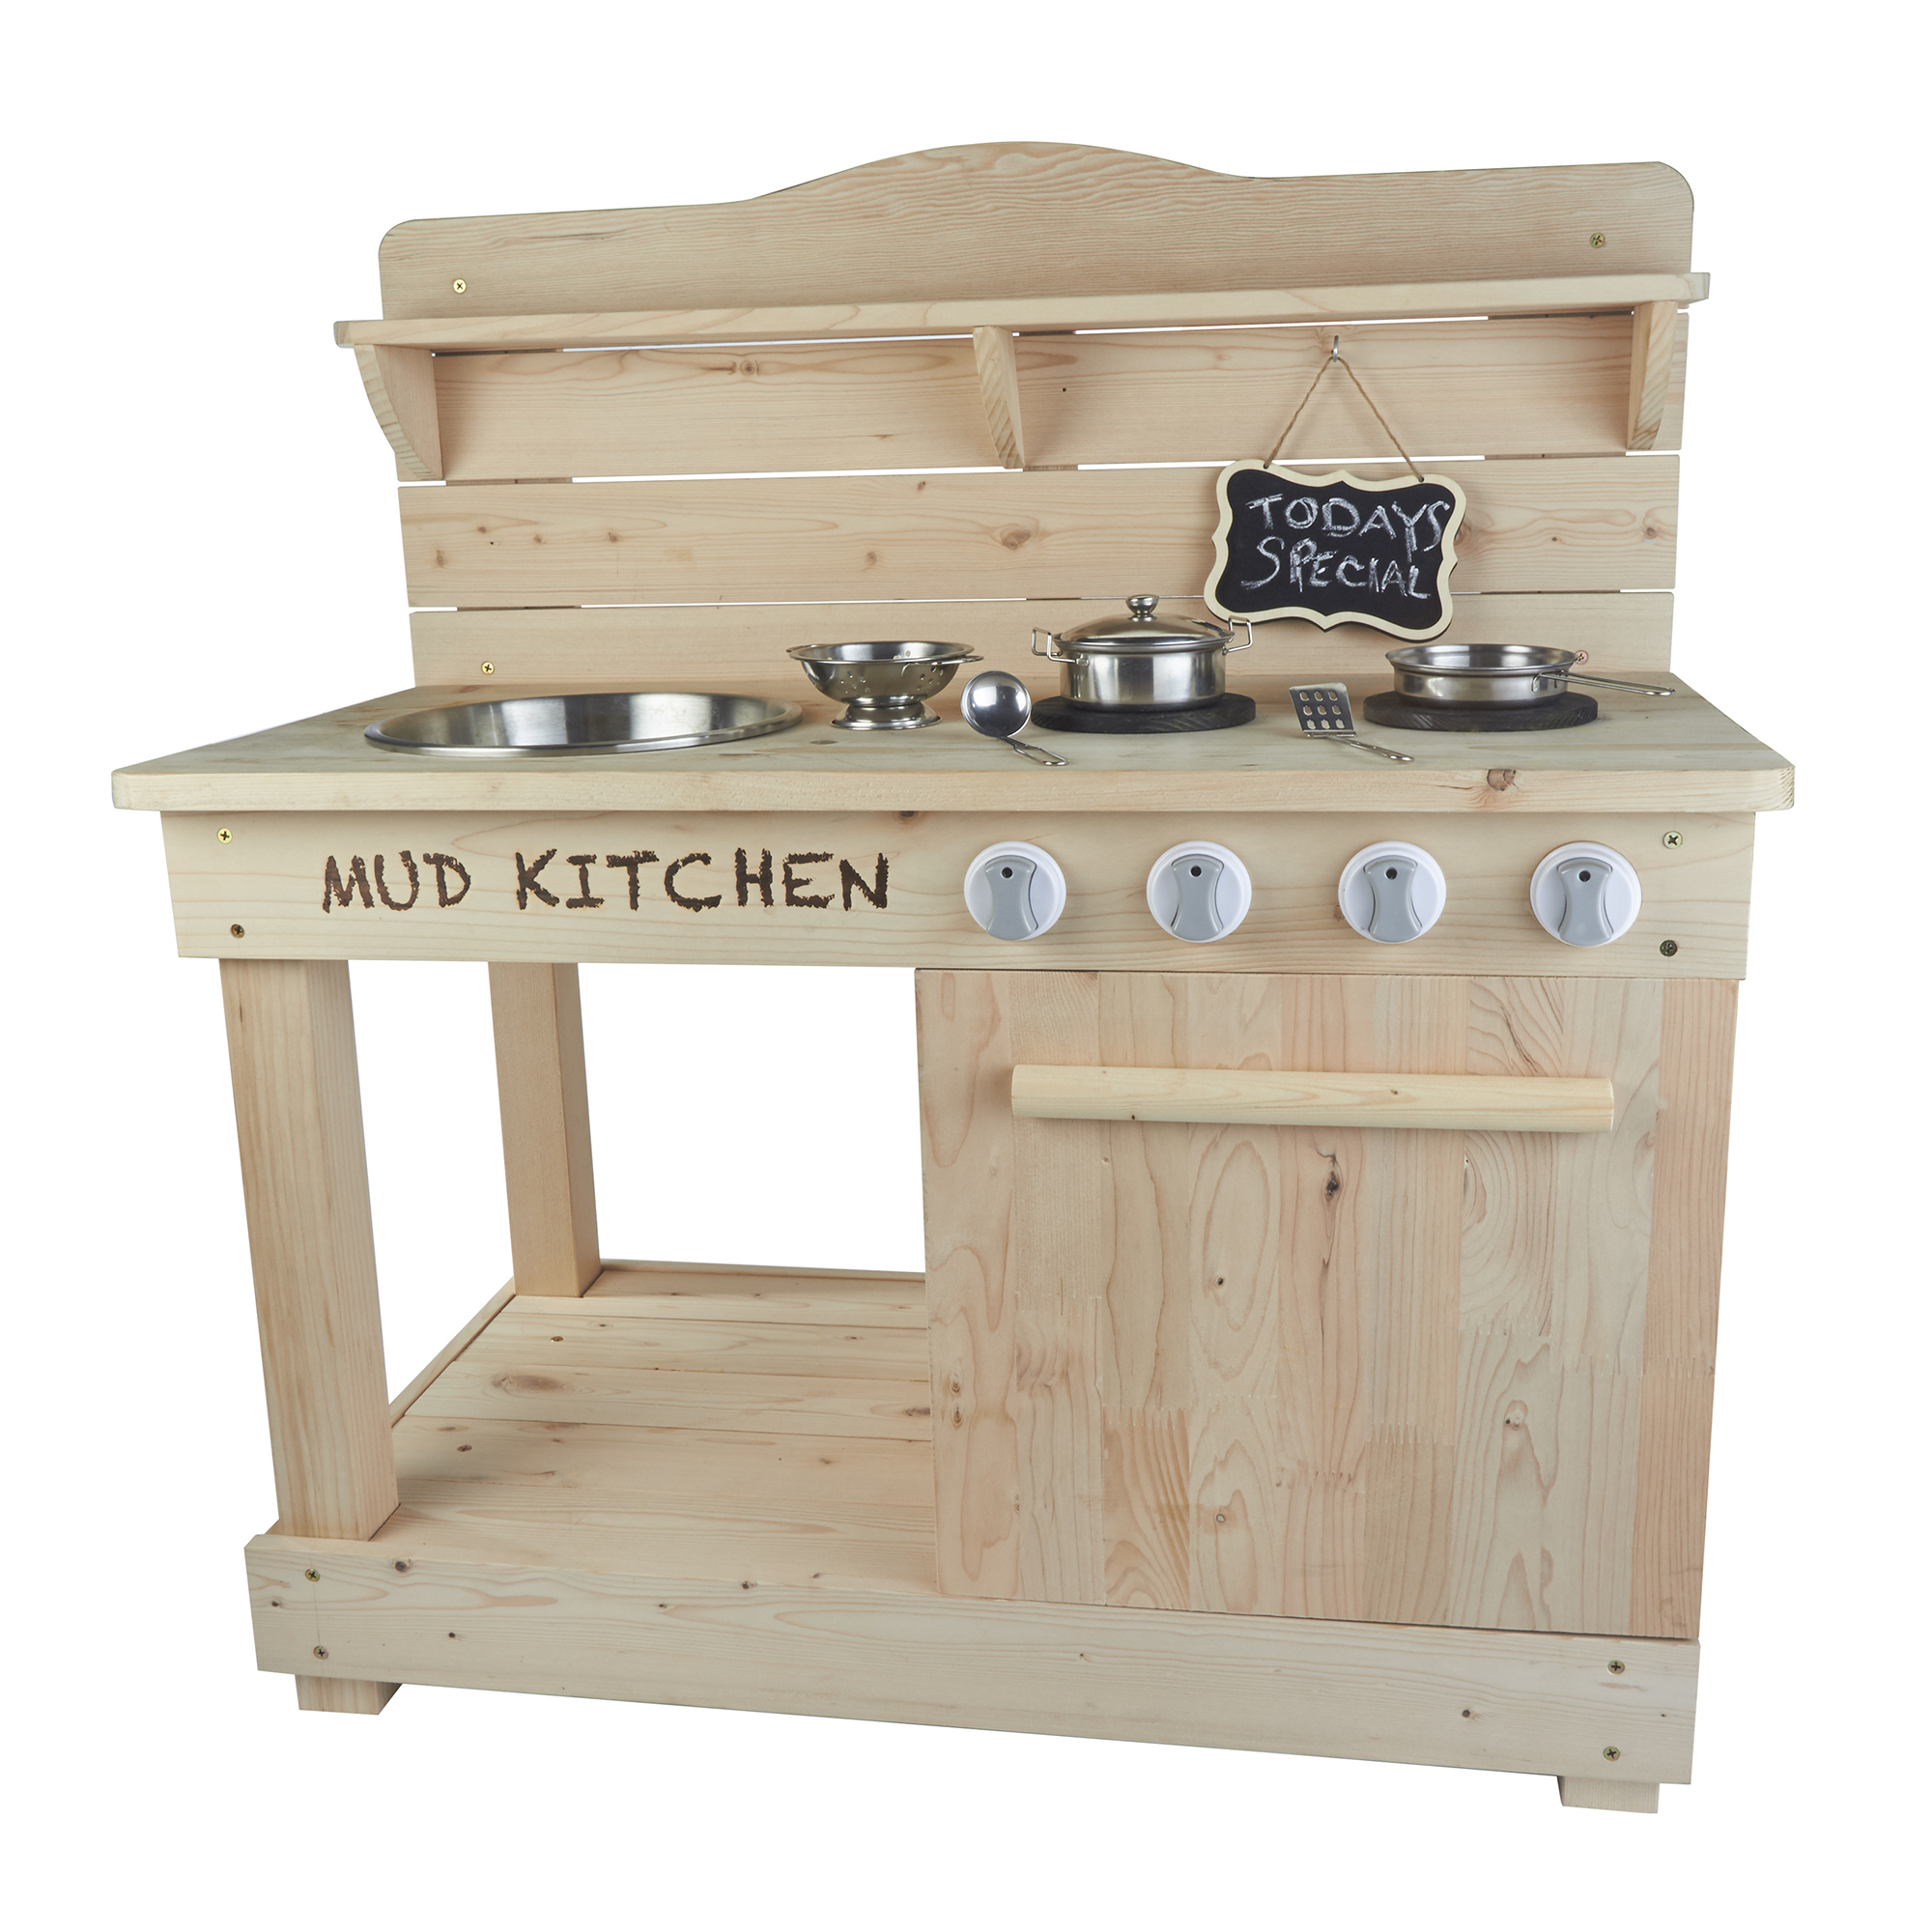 Details about   Kids Wooden Mud Kitchen Solid Timber Frame Weatherproof Outdoor Play Kitchens 